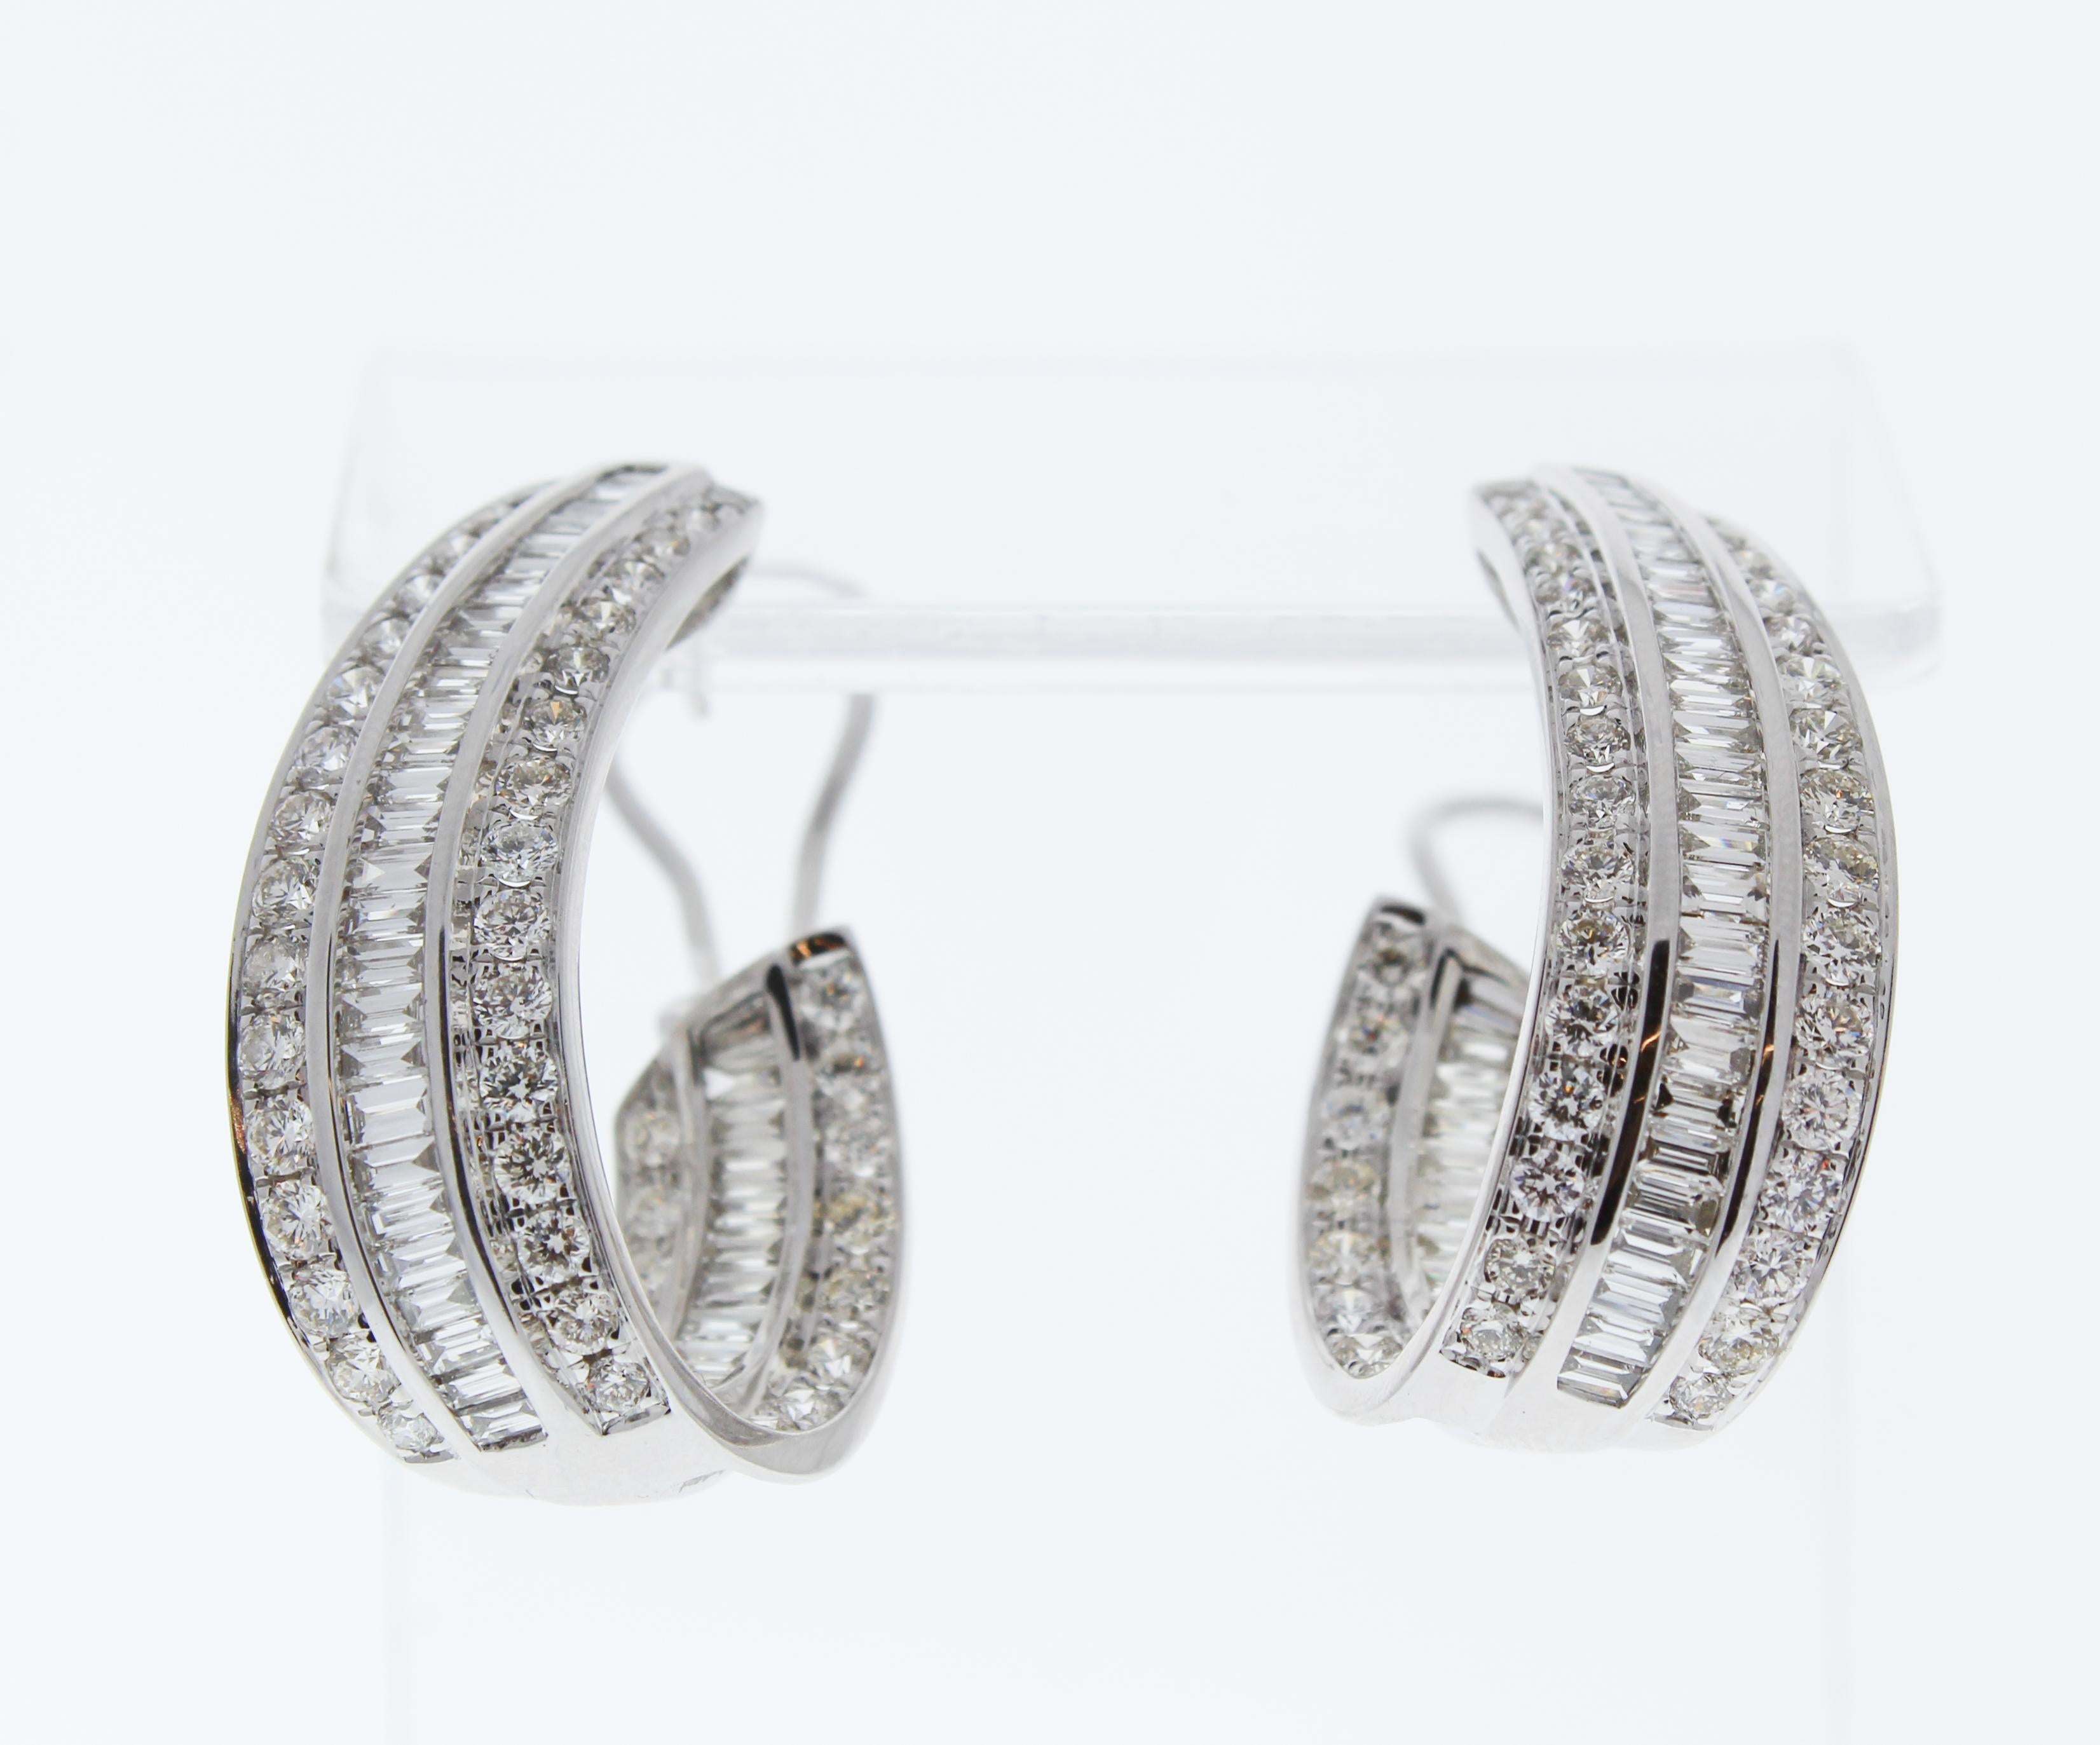 These 18k white gold j-hoop earrings feature one hundred seventy-seven baguette and round brilliant cut diamonds channel set in decadent swirls on the front and inside. These gorgeous inside out diamond hoops make the ultimate present for an